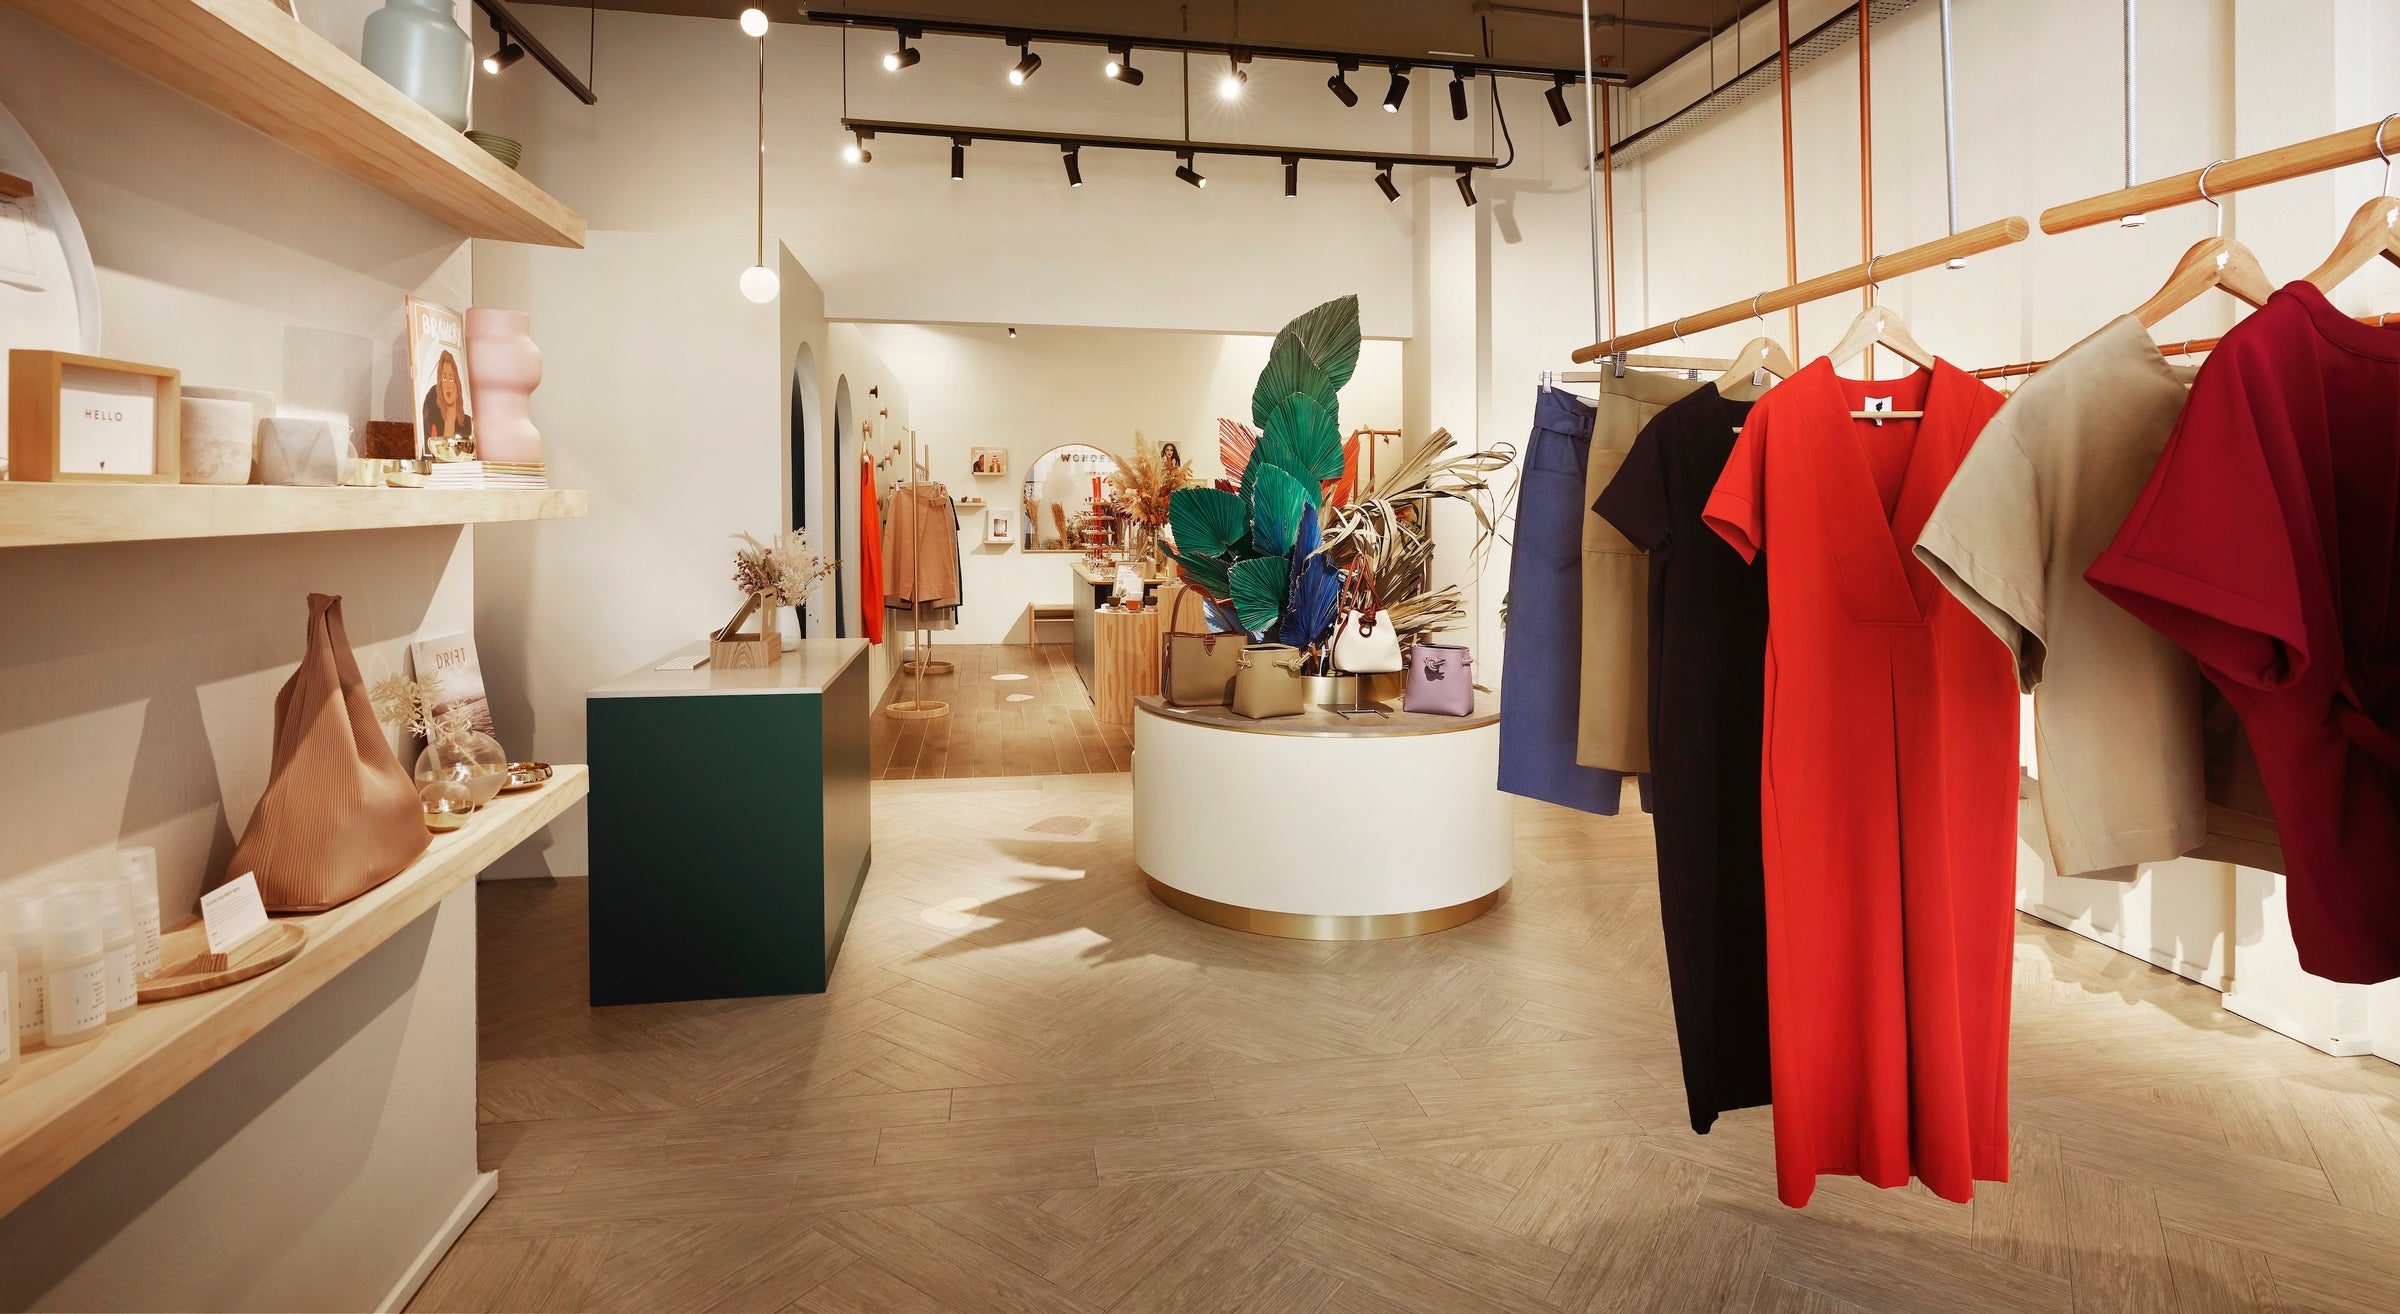 Nana & Bird Flagship Store. Located in the heart of Tiong Bahru, Singapore.